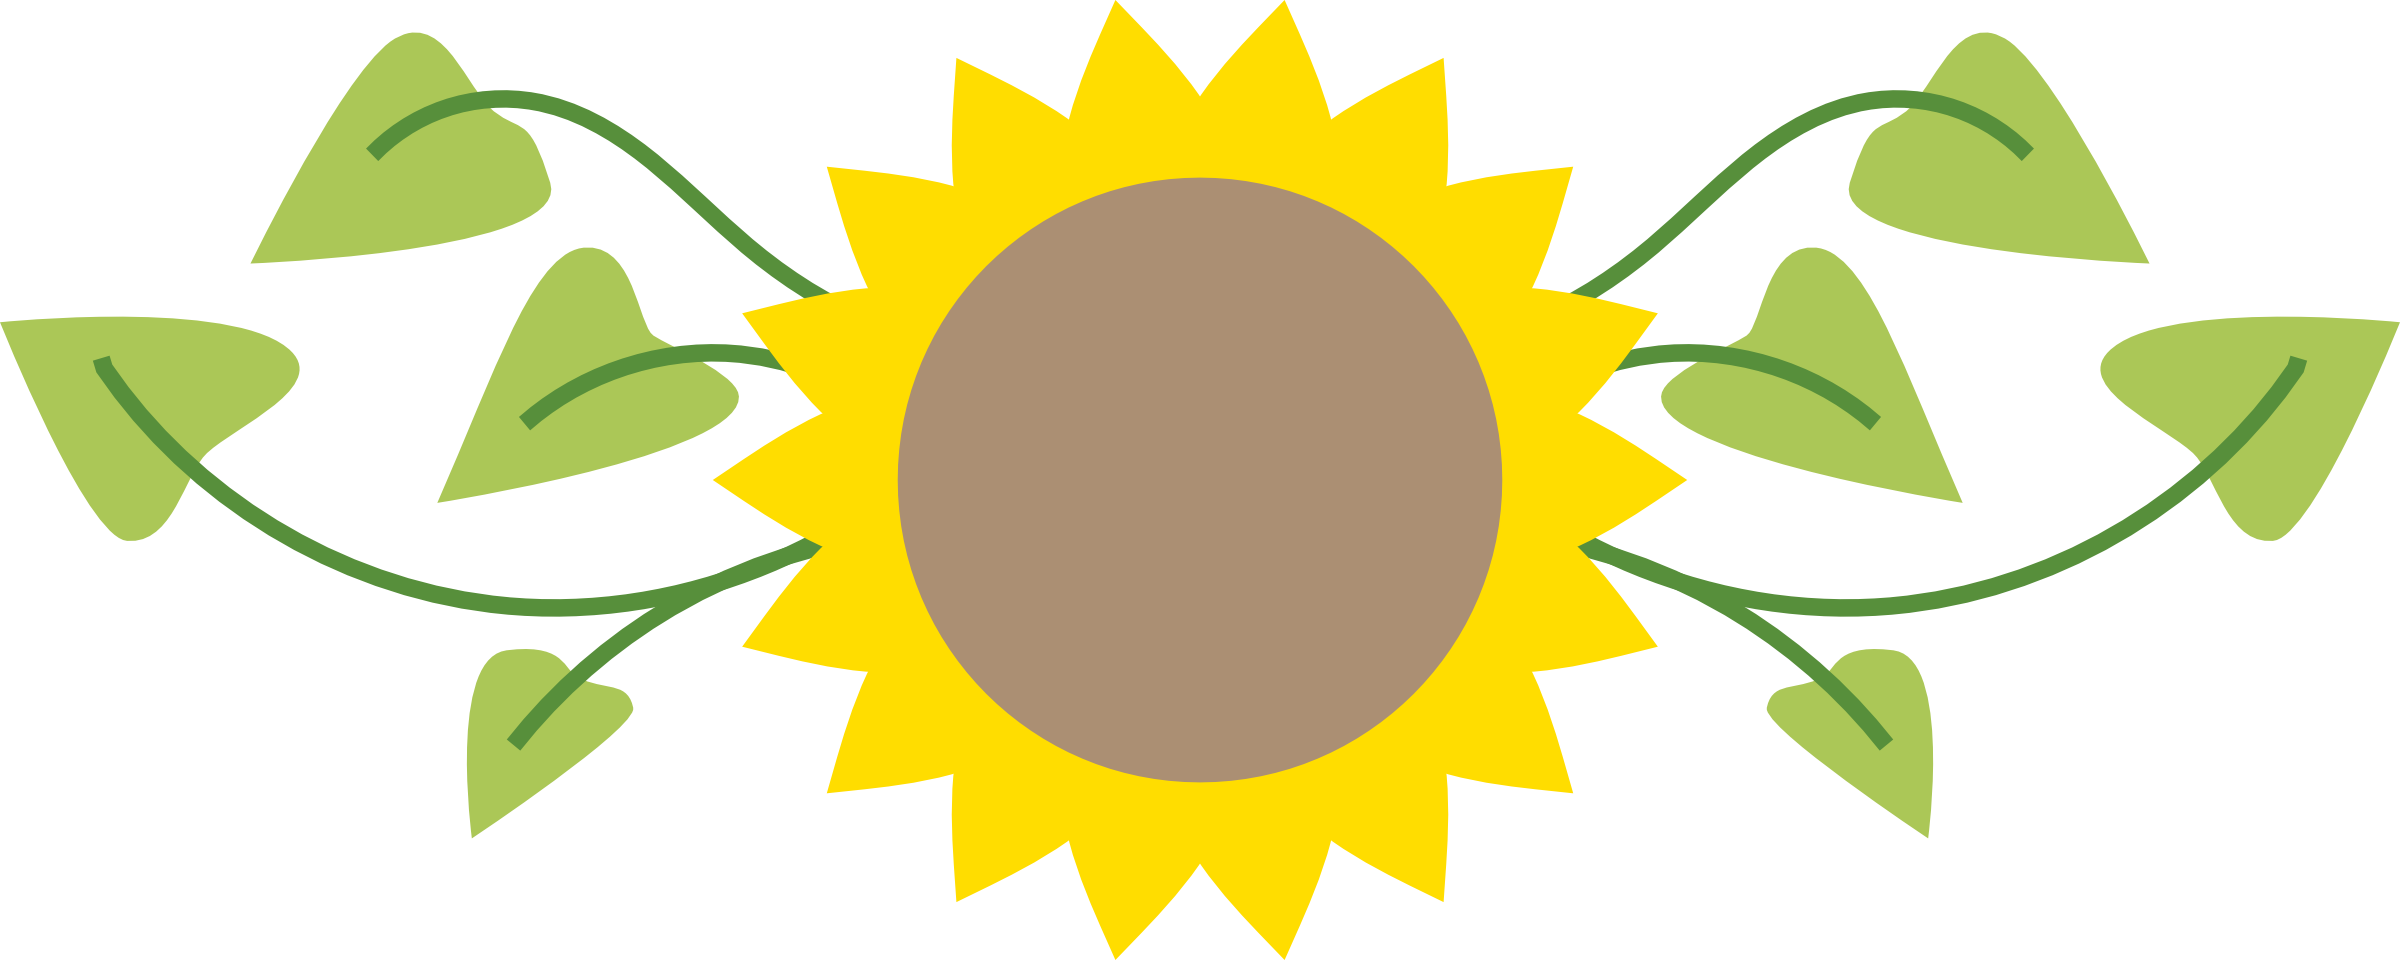 free clipart sunflower pictures - photo #15